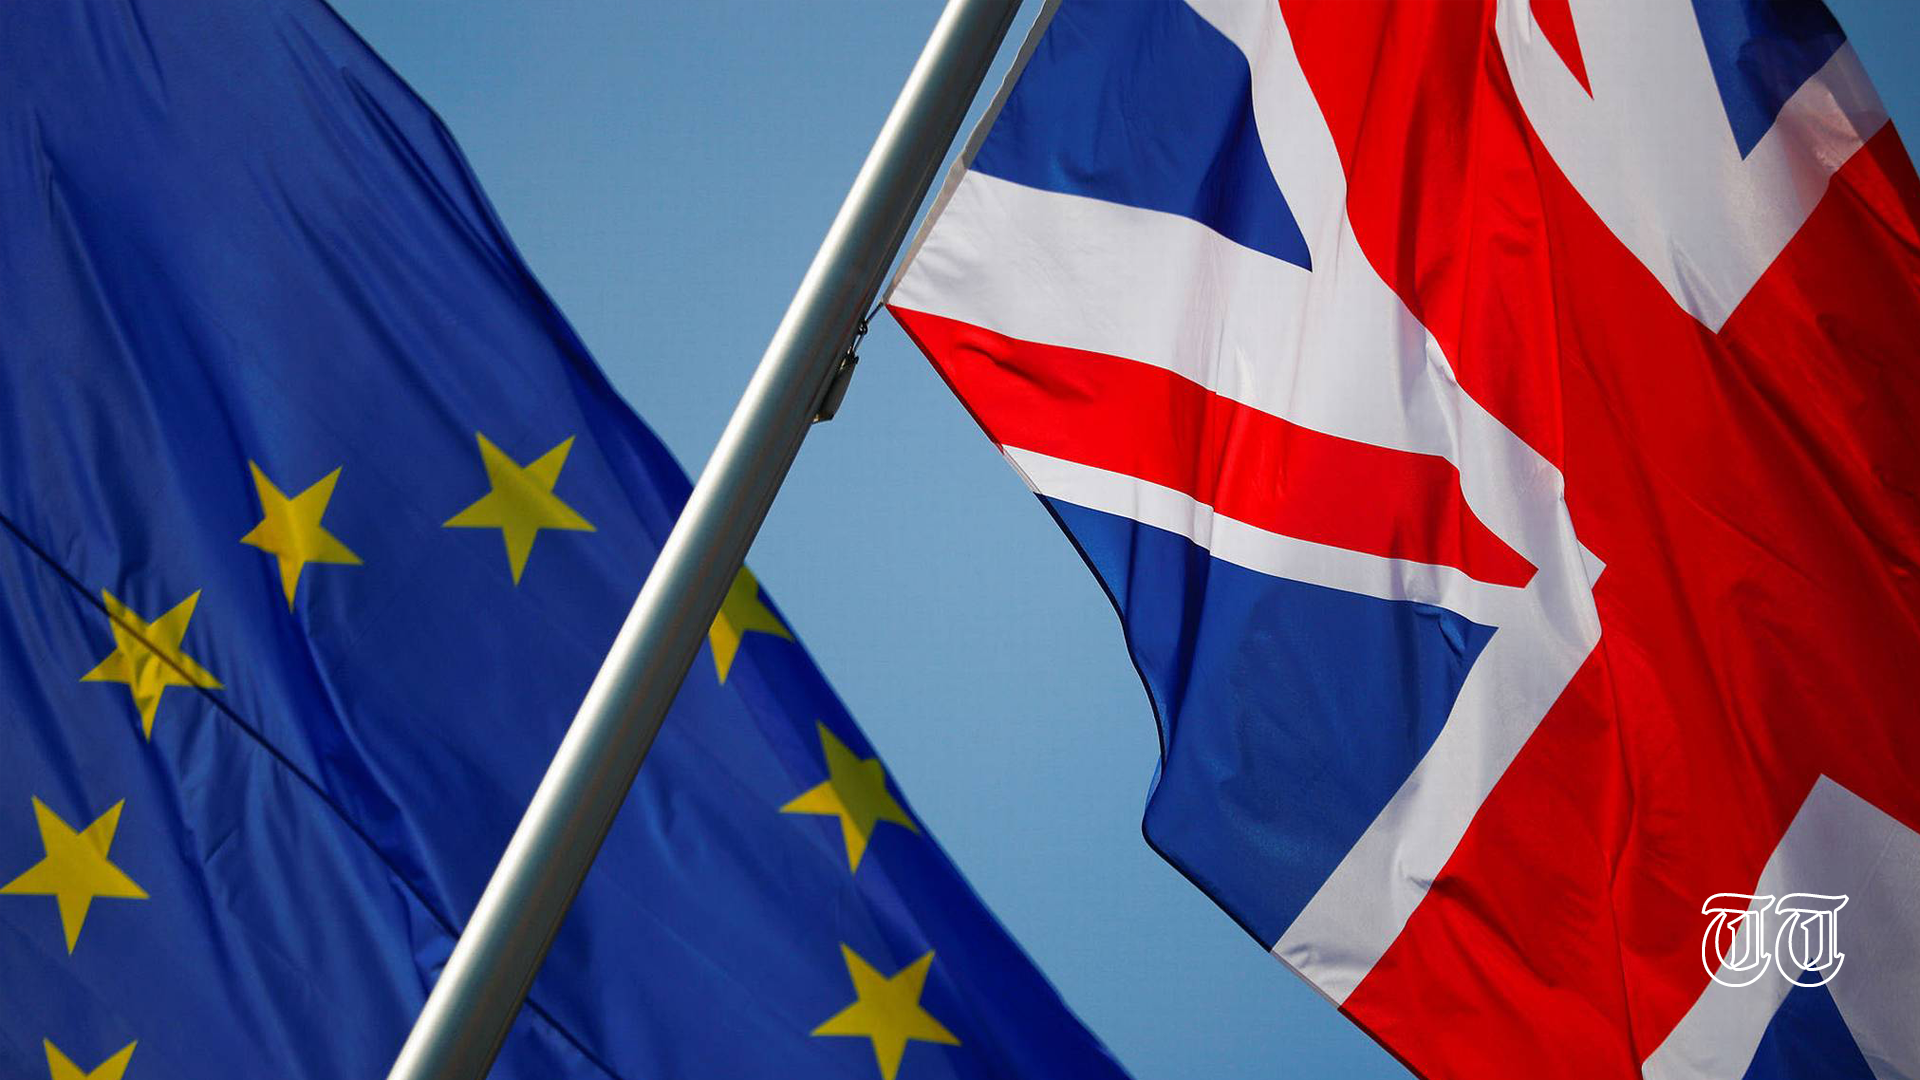 A file photo shows the flags of the United Kingdom and the European Union.